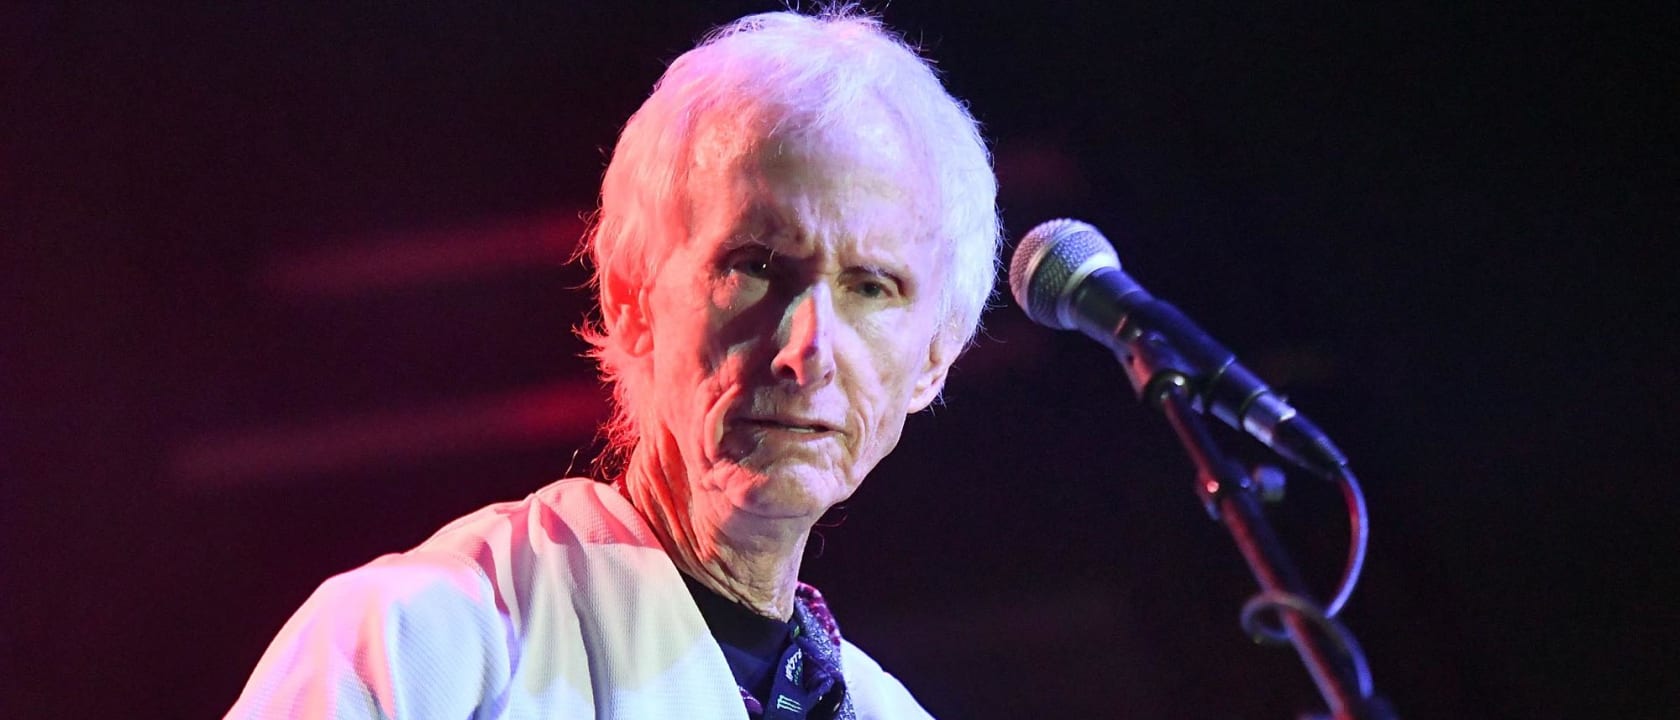 robby krieger tour dates